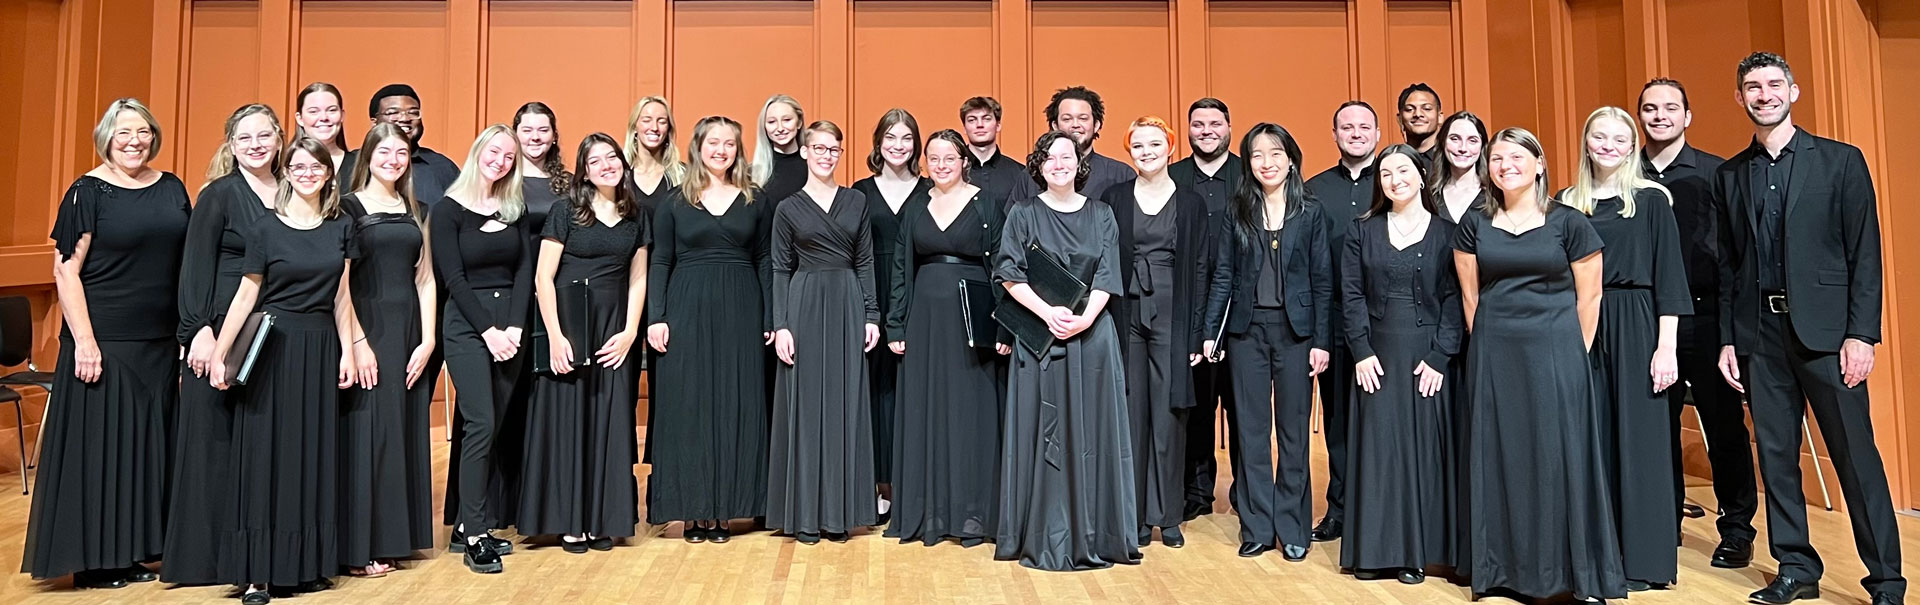 Chorus ensemble wearing all black, posing together for a photo for a performance.